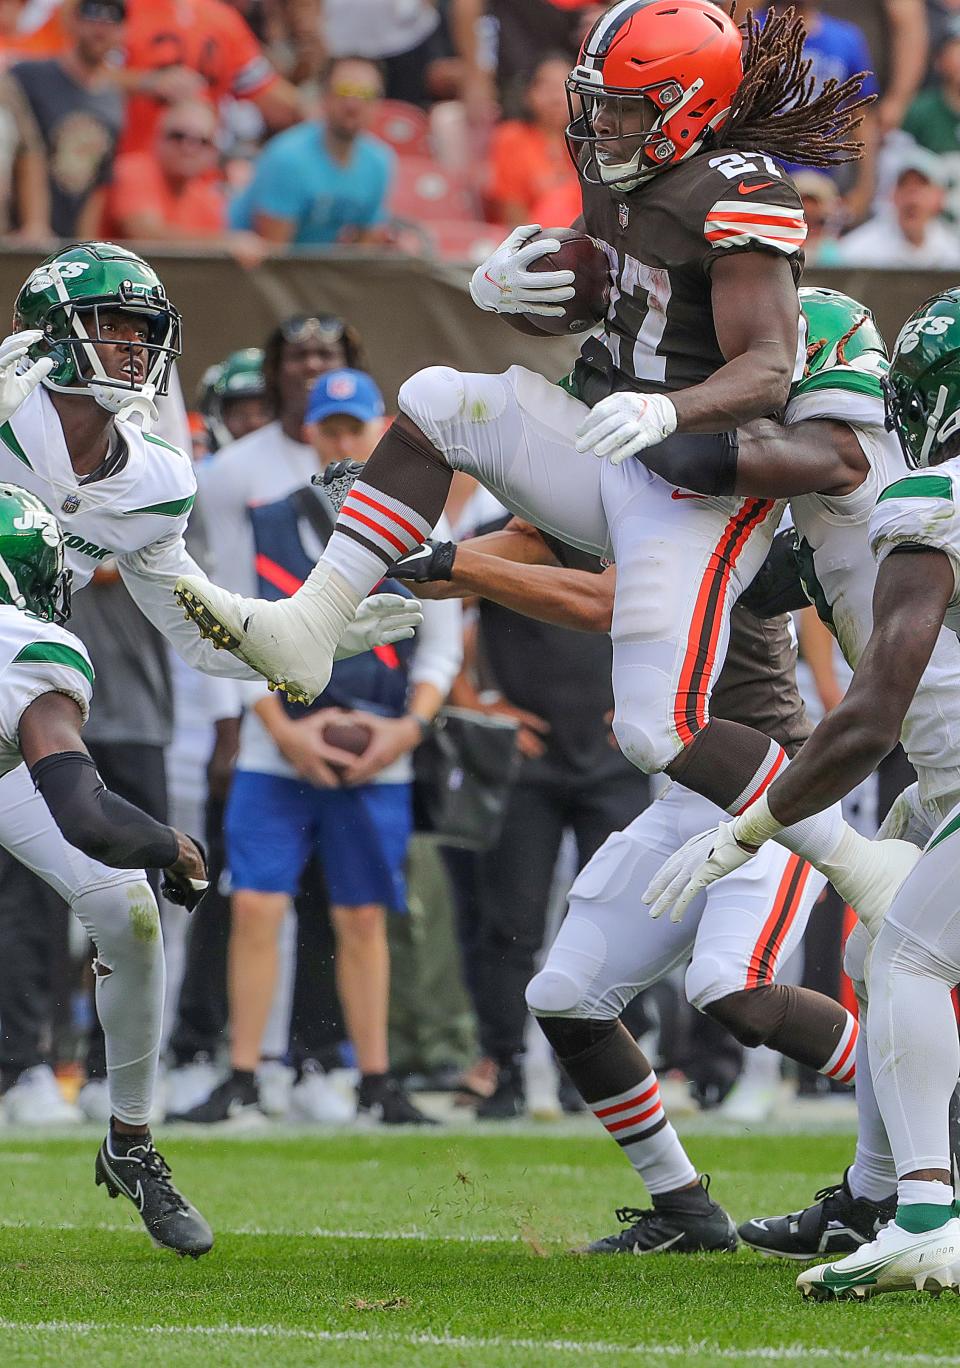 Browns running back Kareem Hunt leaps for extra yardage during a fourth-quarter run against the New York Jets on Sunday, Sept. 18, 2022 in Cleveland.